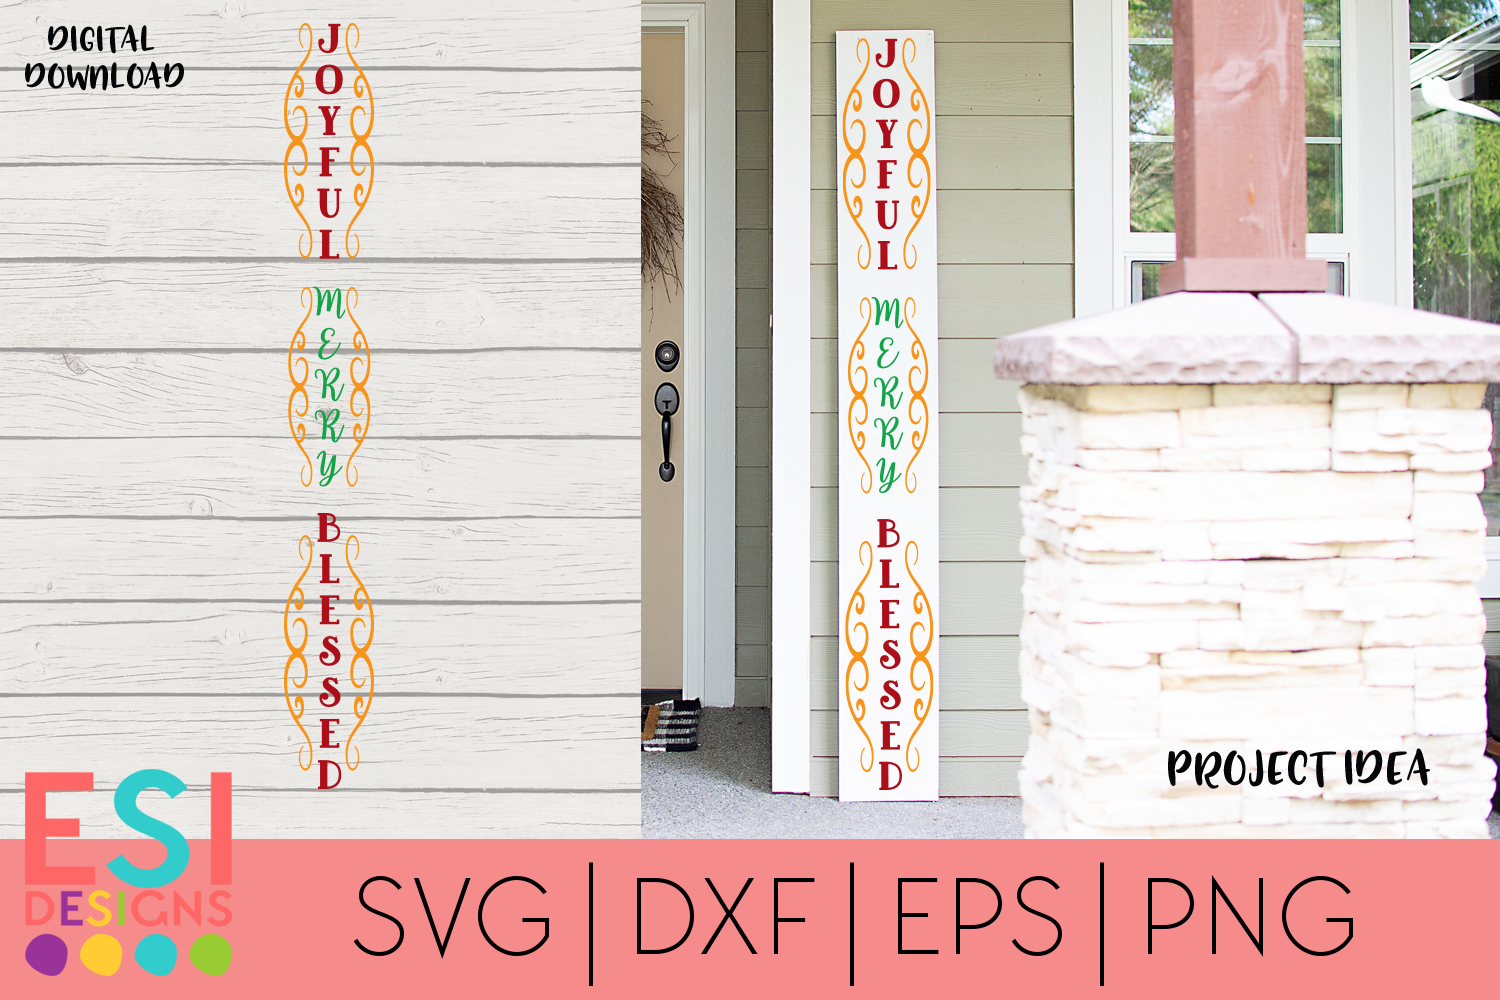 Download Christmas Porch Sign |Joyful Merry Blessed|SVG DXF EPS PNG